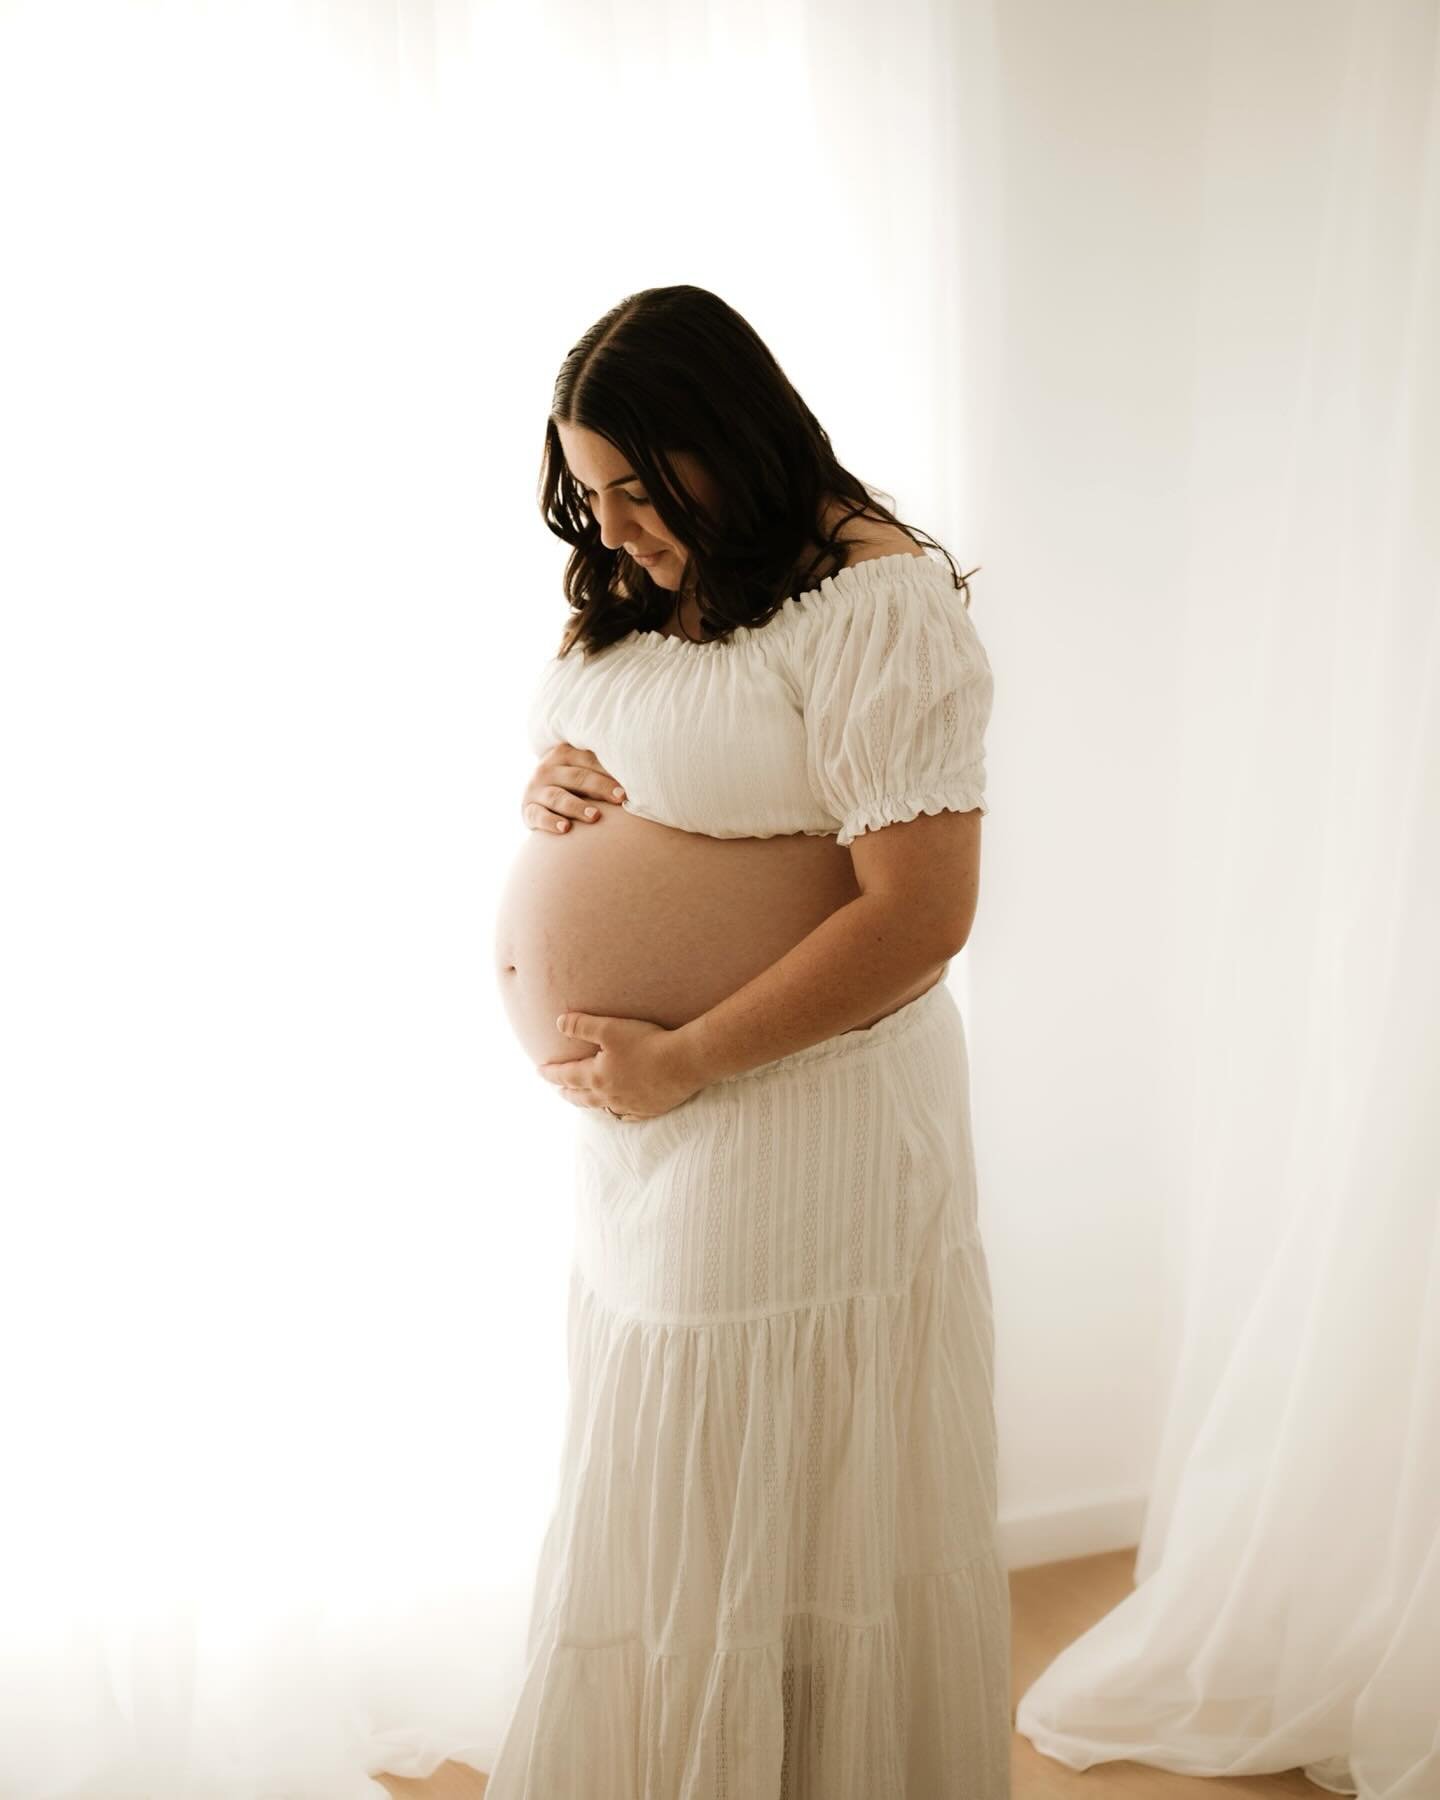 Studio maternity sessions are fast becoming a favourite of mine. The beautiful Hannah at 34 weeks, isn&rsquo;t she just gorgeous! So close to meeting their forever love 🕊️

Our third session together. 
I captured Hannah and Daniel in an engagement s